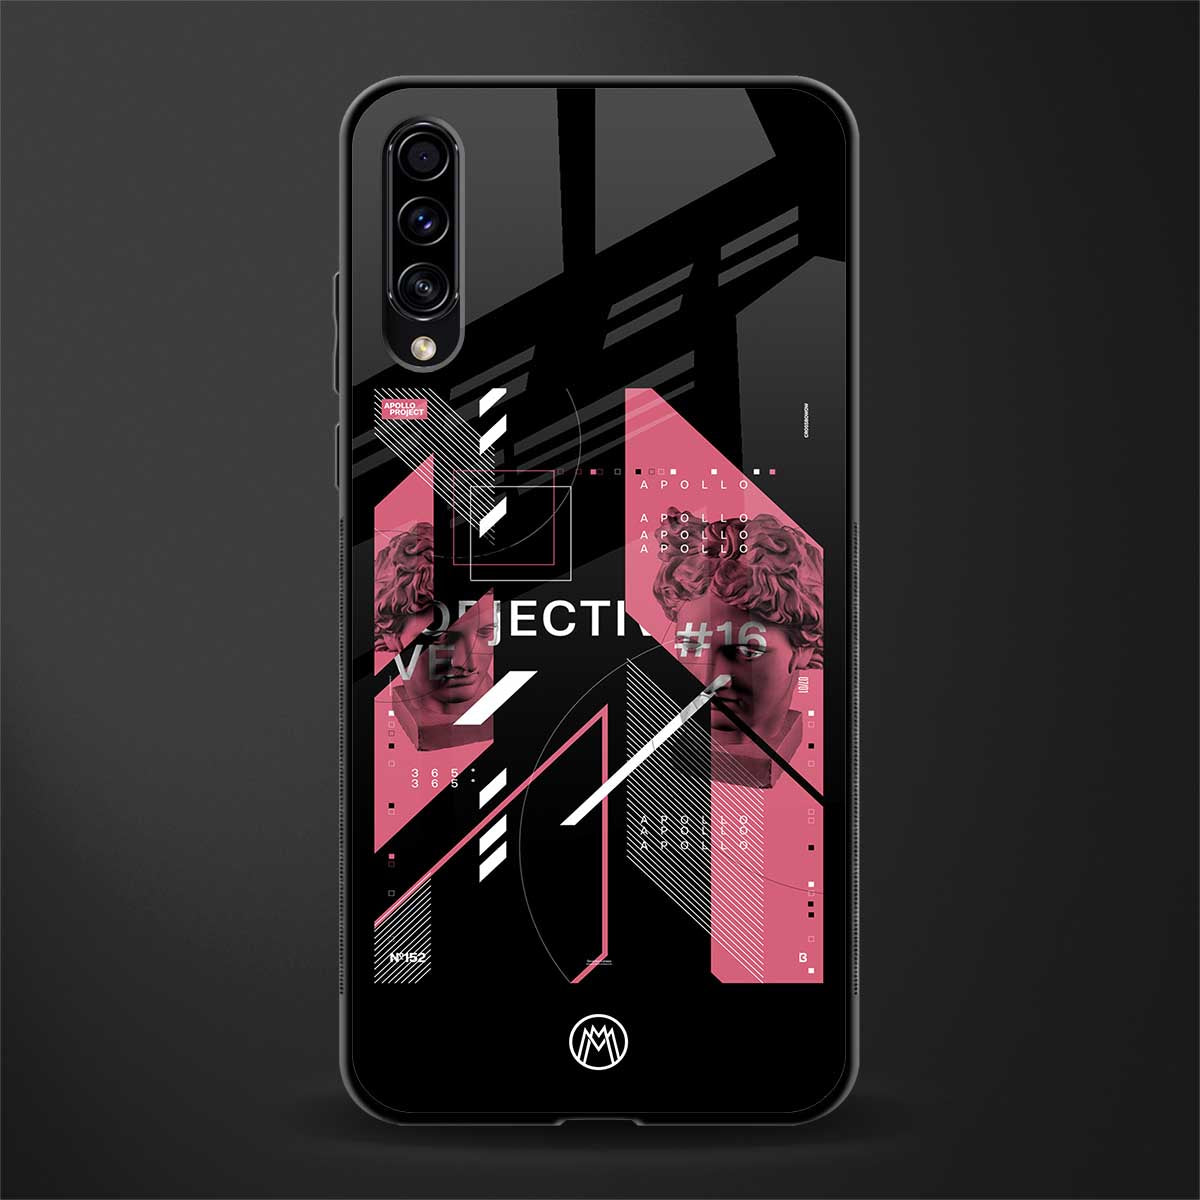 apollo project aesthetic pink and black glass case for samsung galaxy a50s image